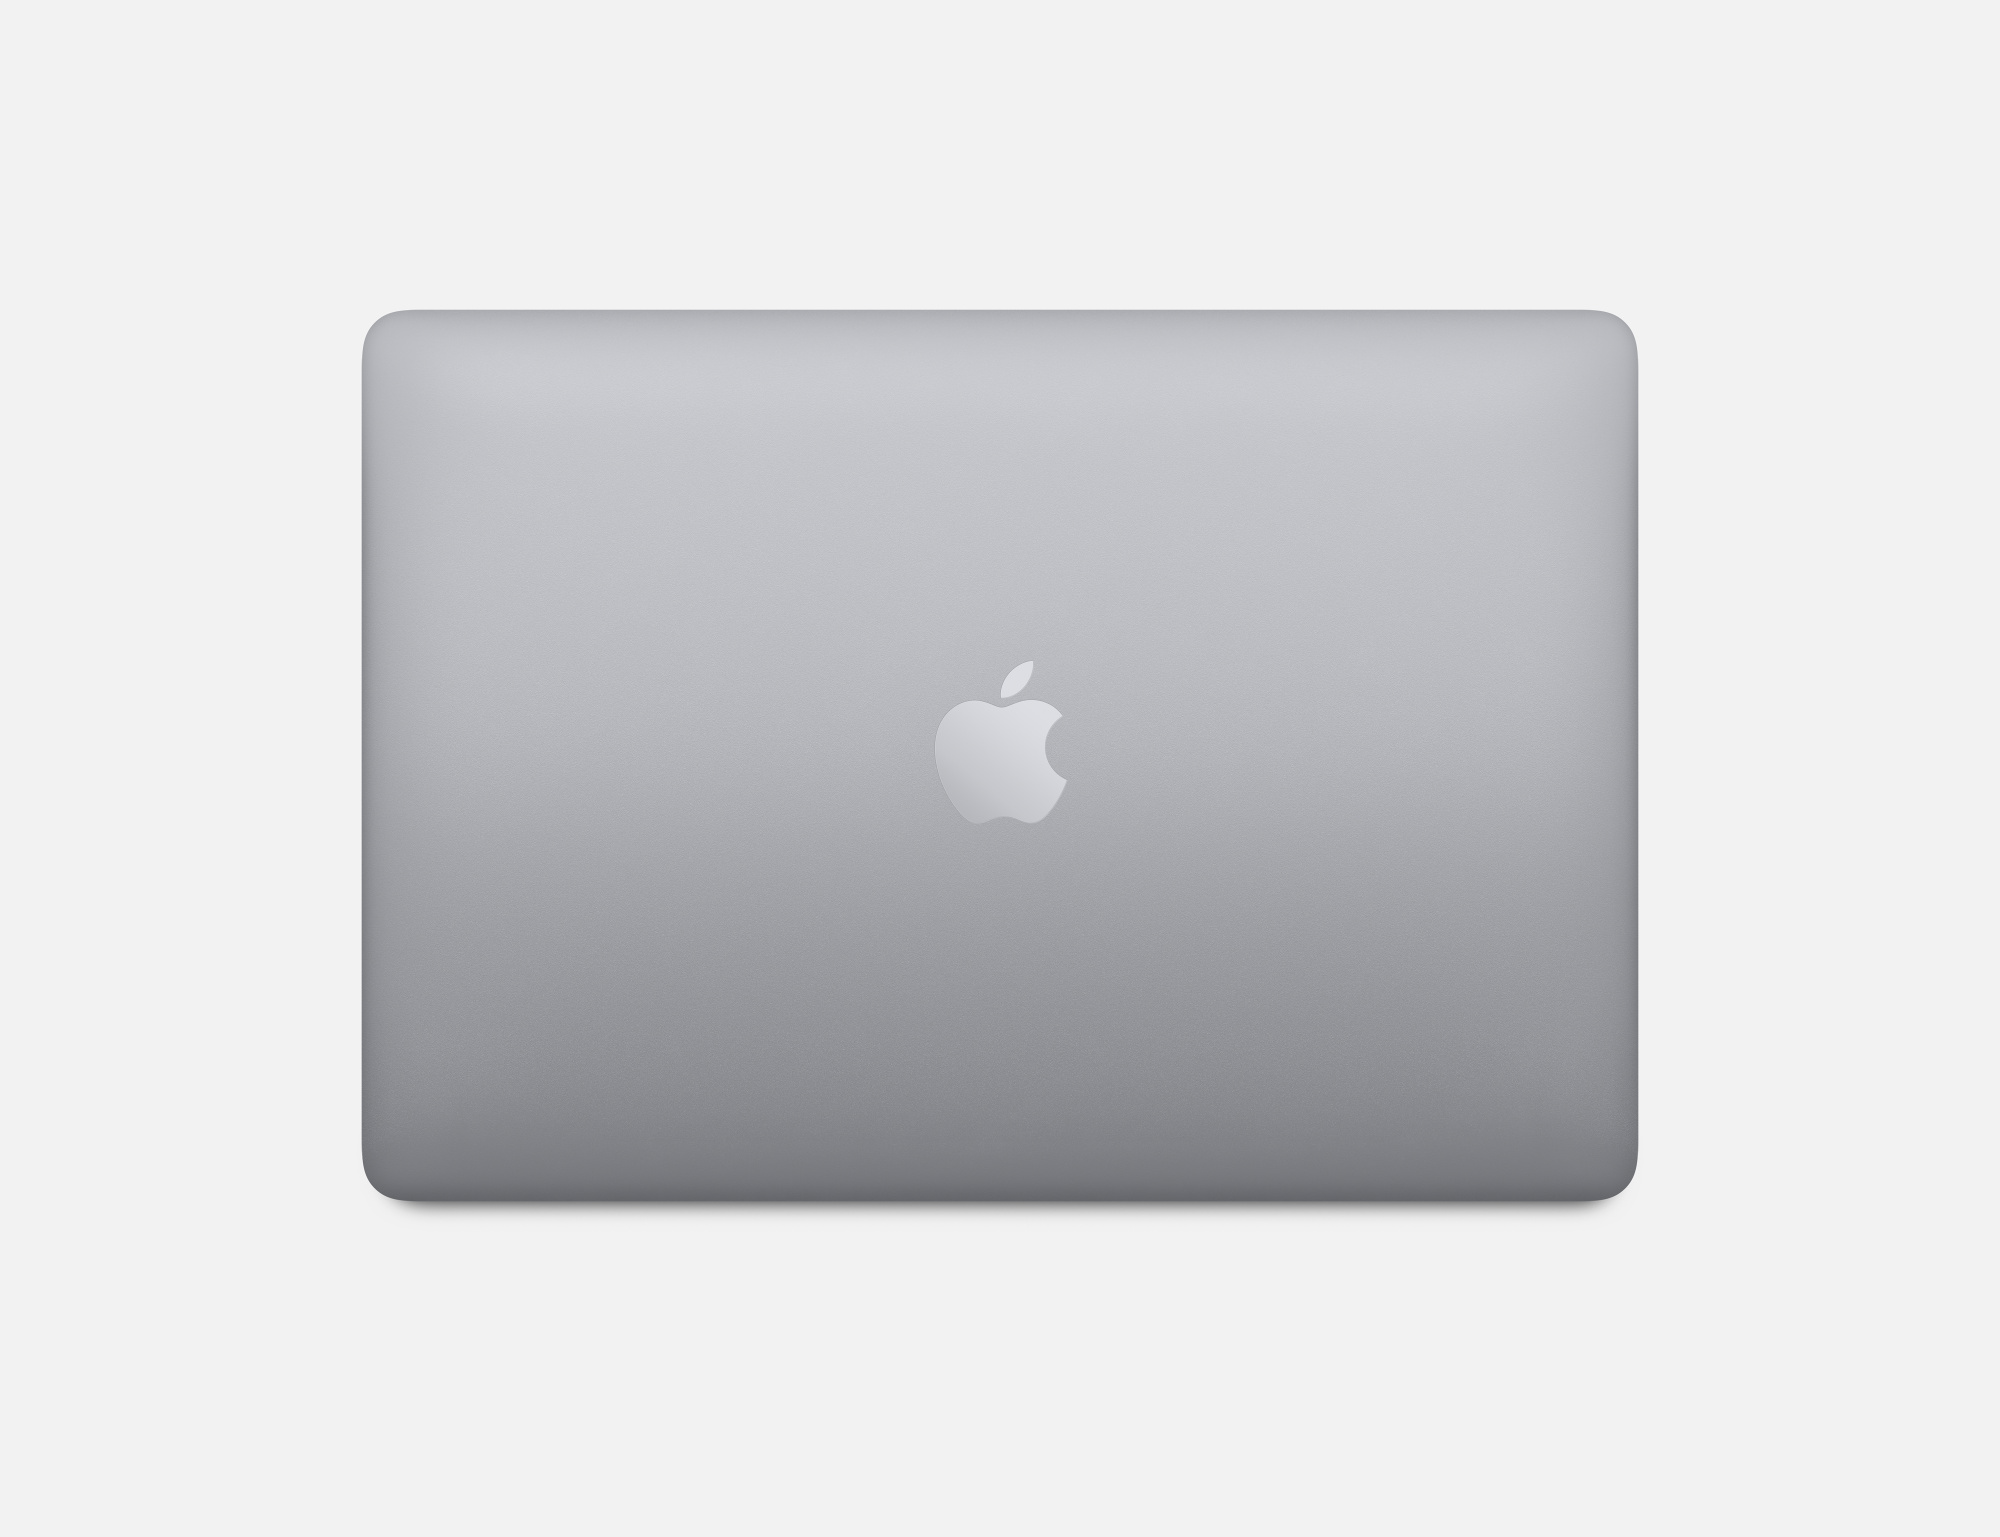 mbp-spacegray-gallery6-202206